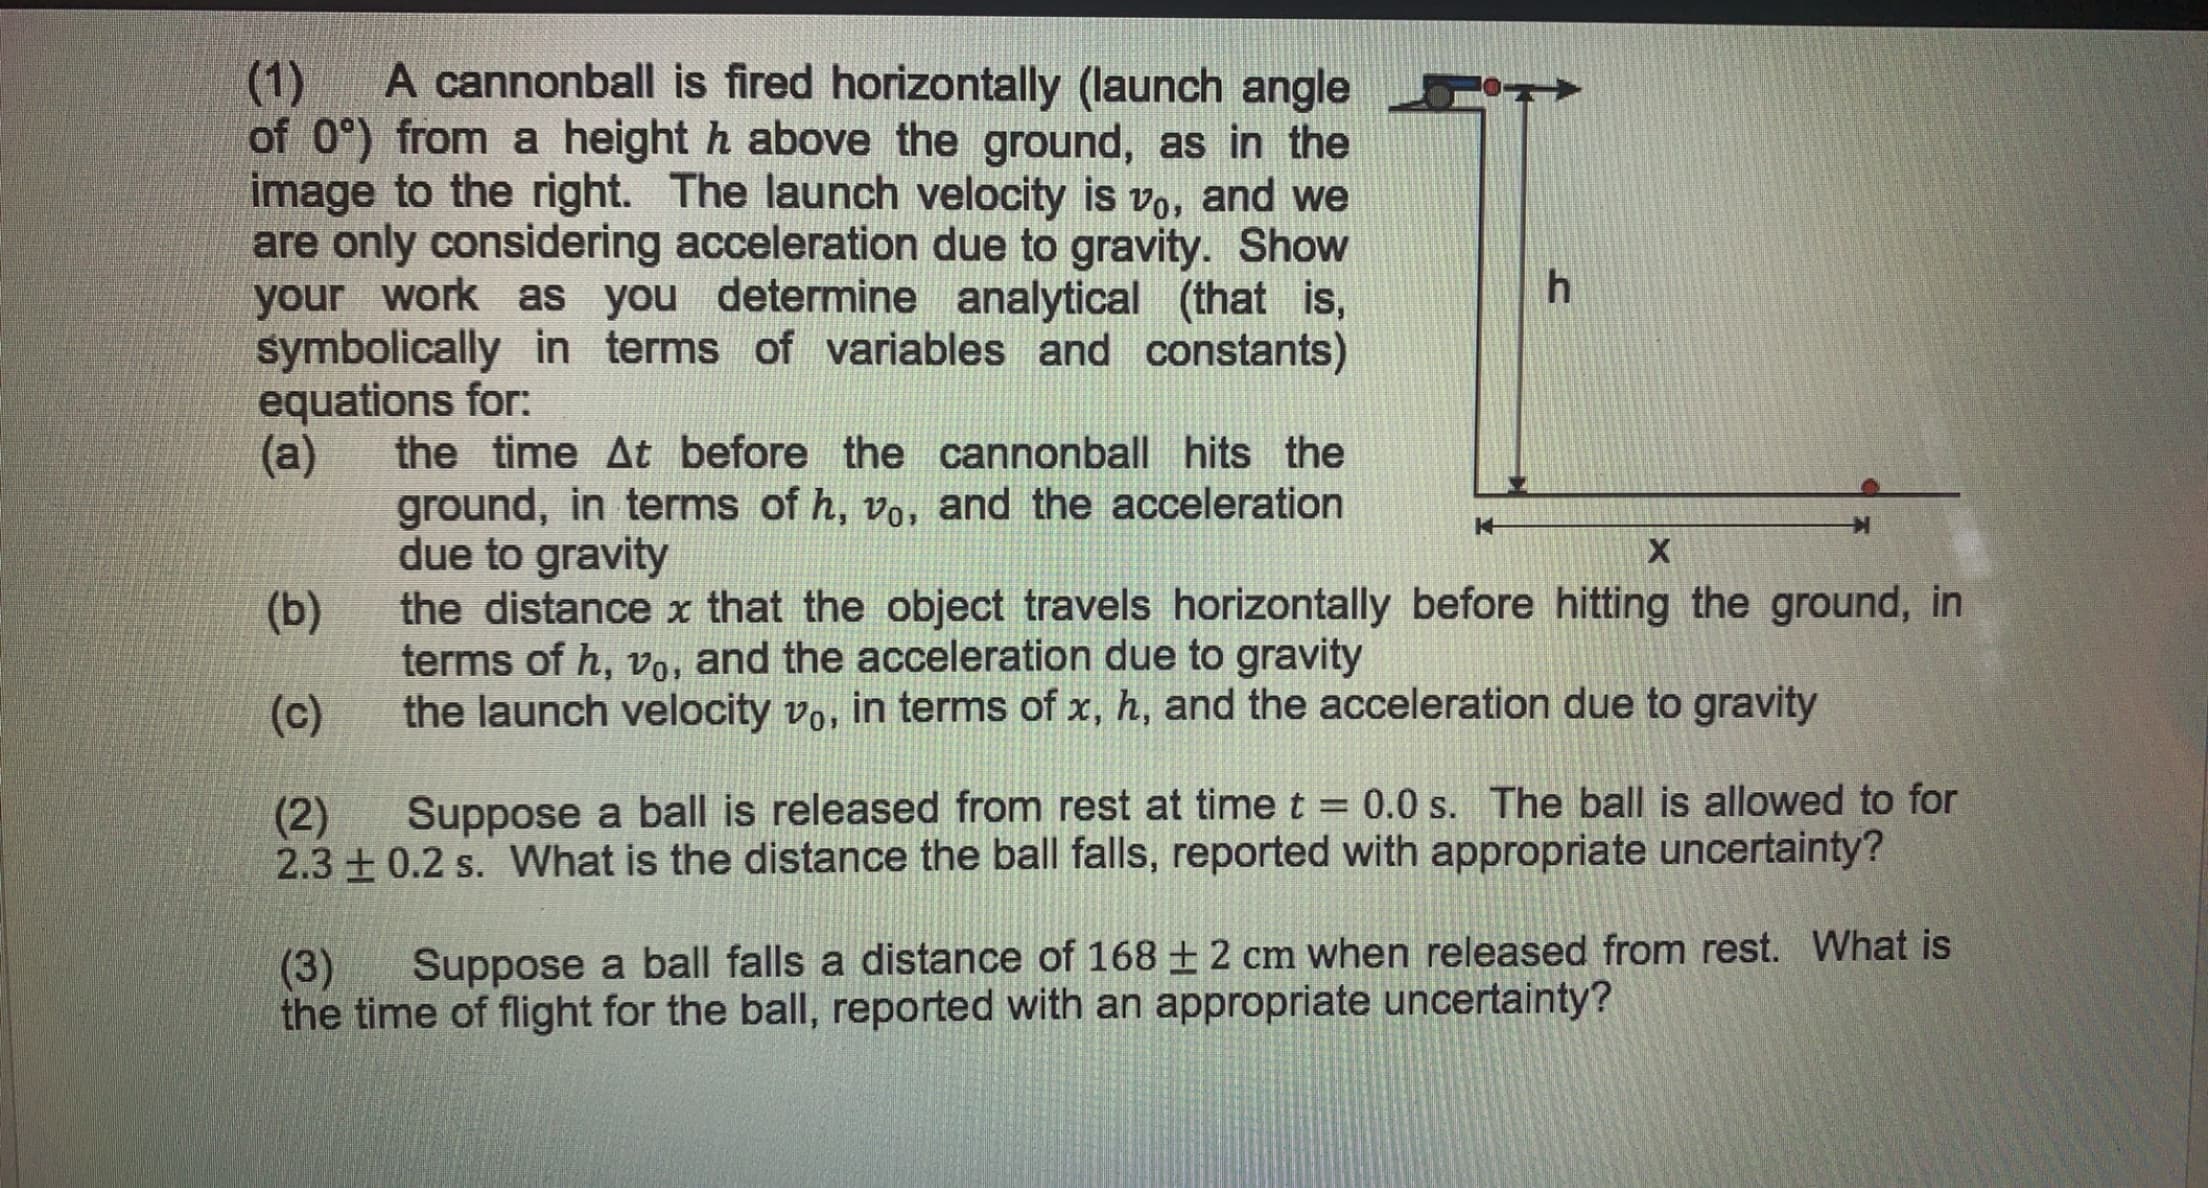 Suppose a ball falls a distance of 168 +2 cm when released from rest. What is
(3)
the time of flight for the ball, reported with an appropriate uncertainty?
